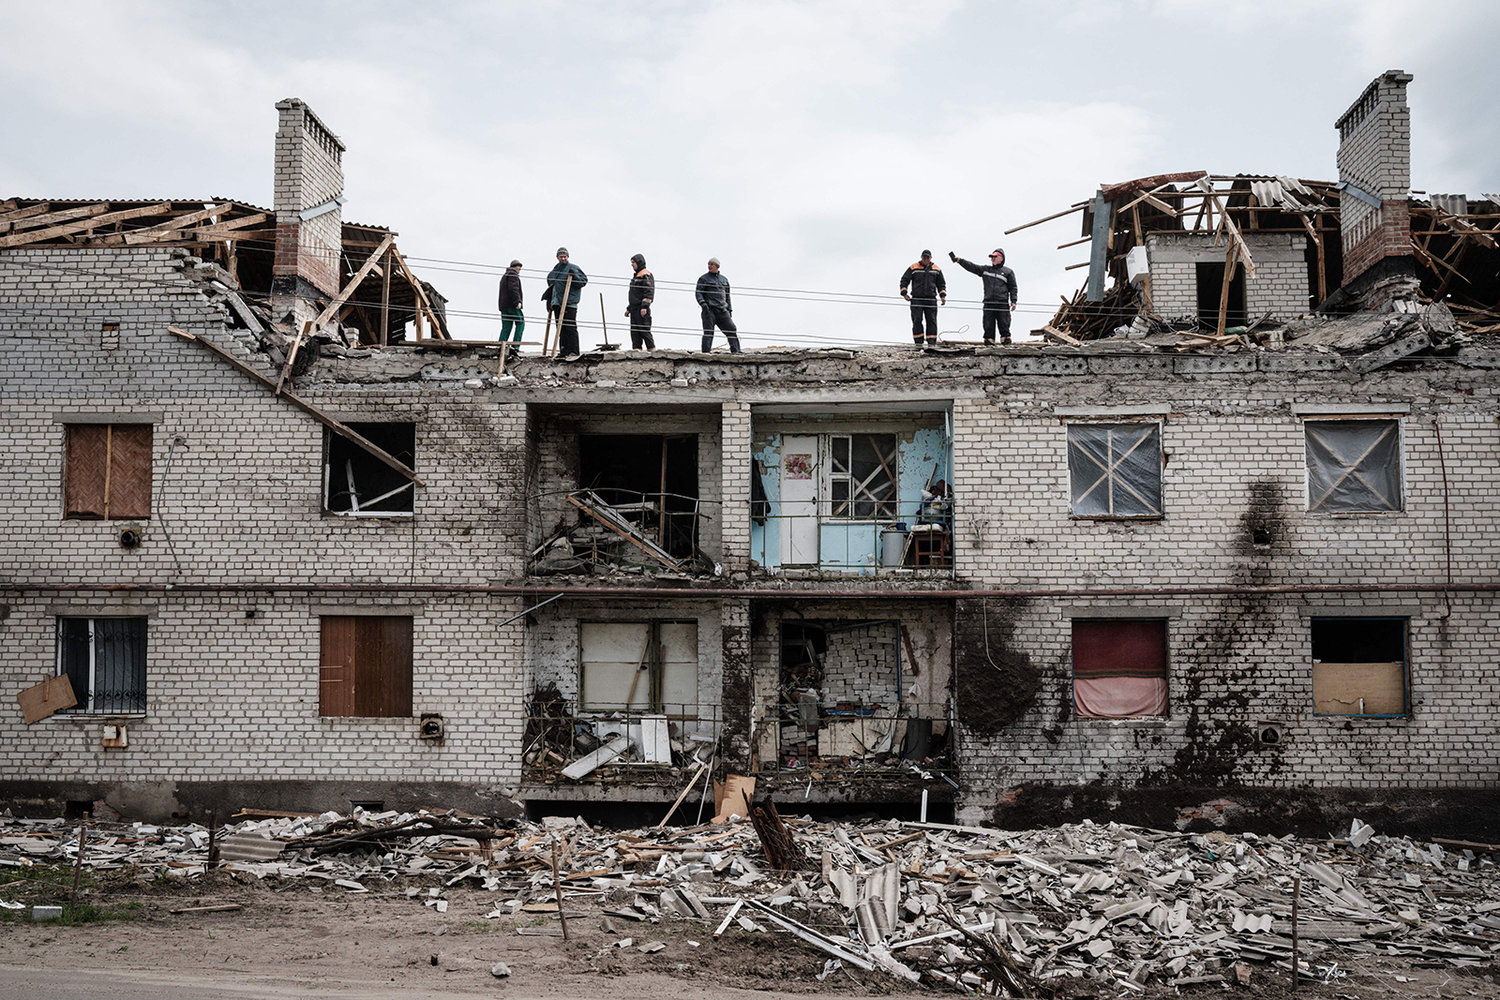 Workers clean rubbles atop a buidling destroyed by shelling a month ago in Cherkaske, eastern Ukraine on May 11, 2022, amid the Russian invasion of Ukraine. (Yasuyoshi Chiba/AFP via Getty Images/TNS)